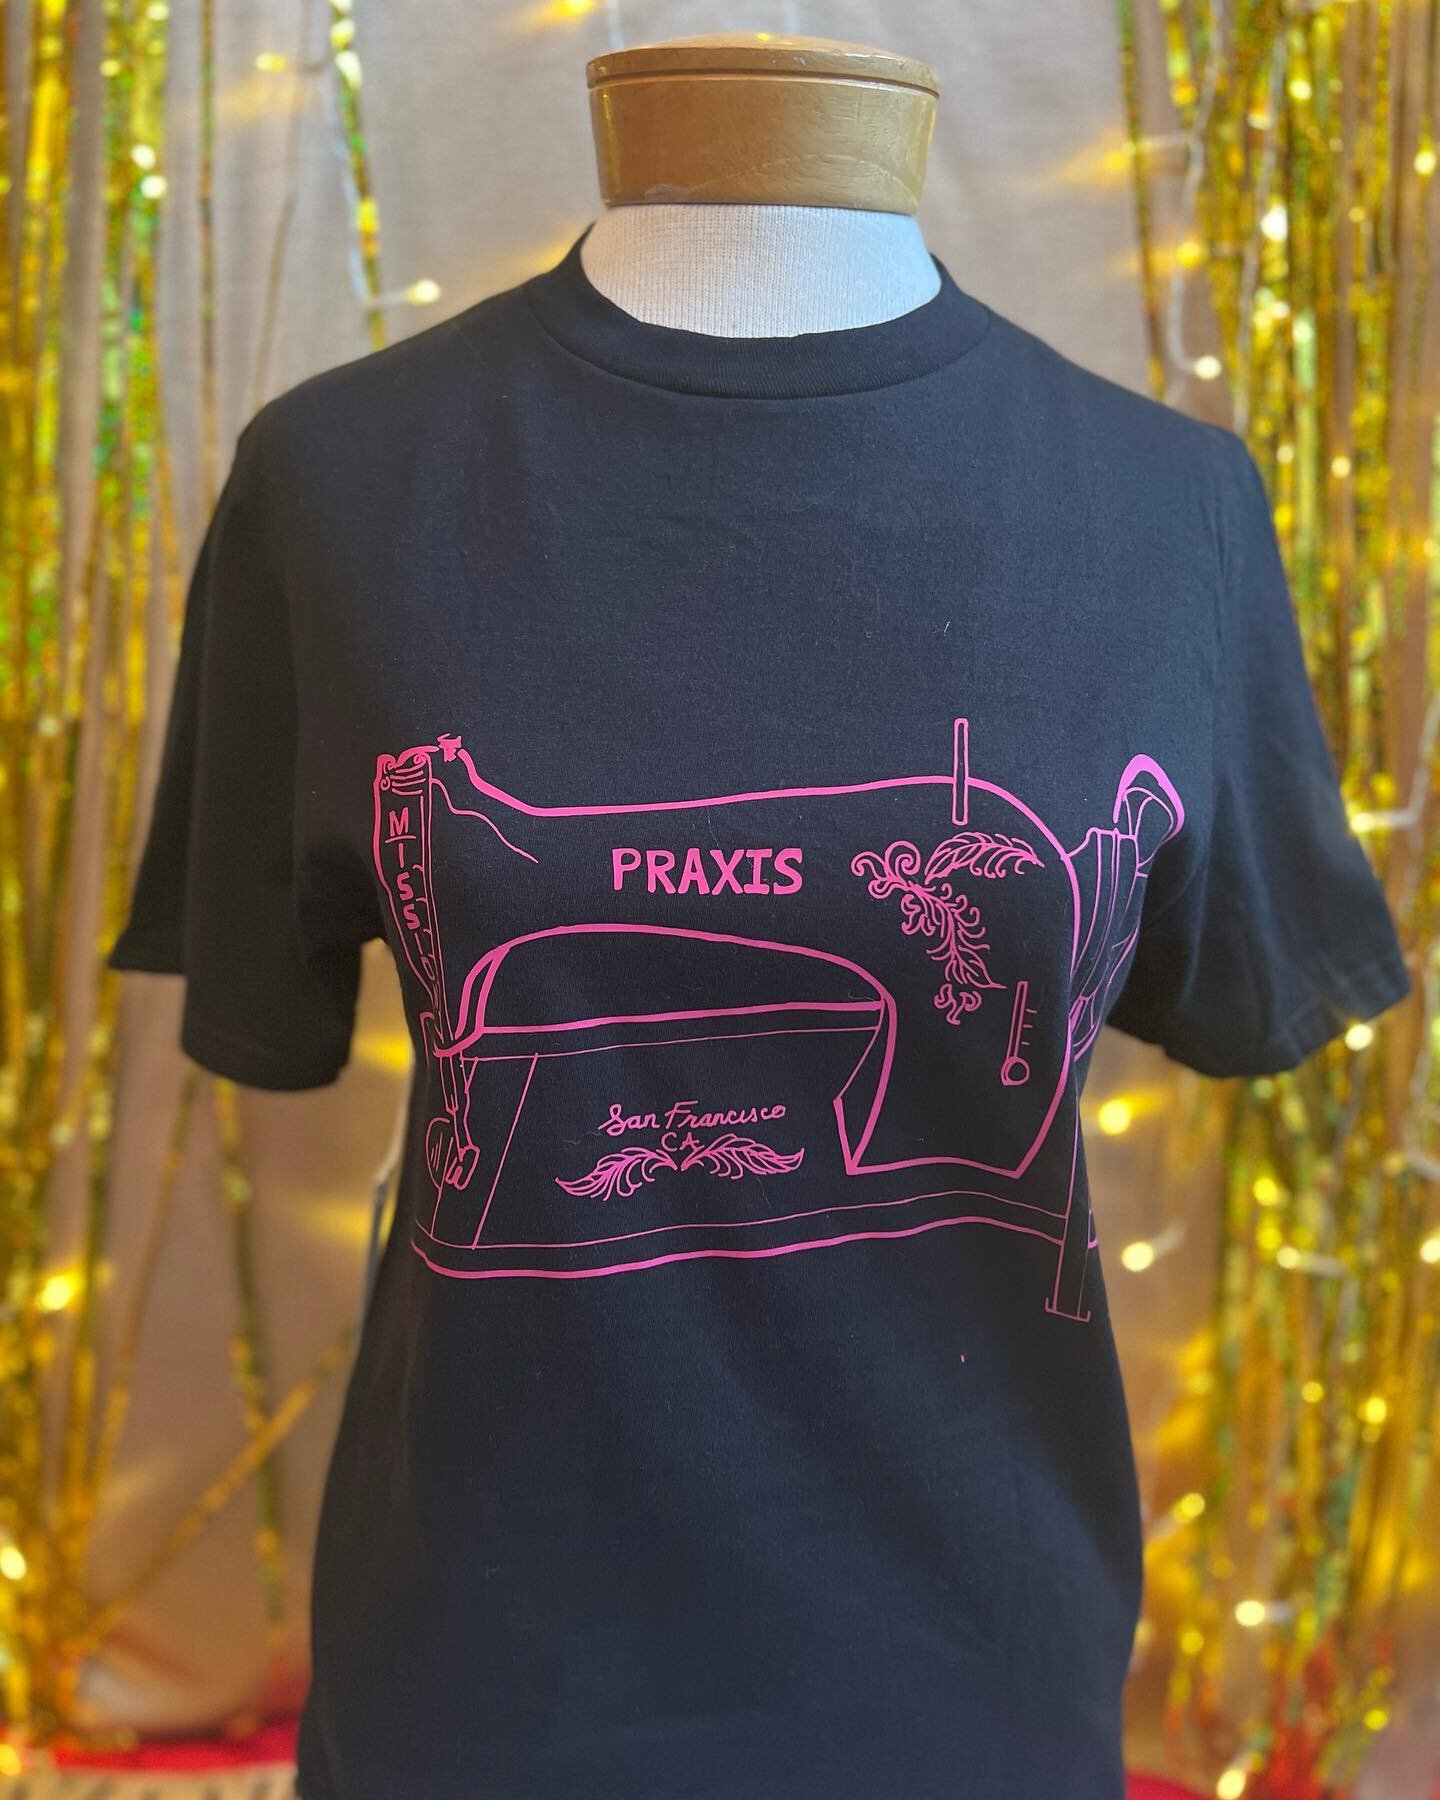 Fresh batch of #handprinted #tshirts available 
✨👽✨
mix and match colors and sizes of my drawings 💖 $35 each at #missionpraxis
✨you can get your shirt cropped for $10 ✨ in store only 🥰 please allow 15-20min for the crop magic to happen live and in